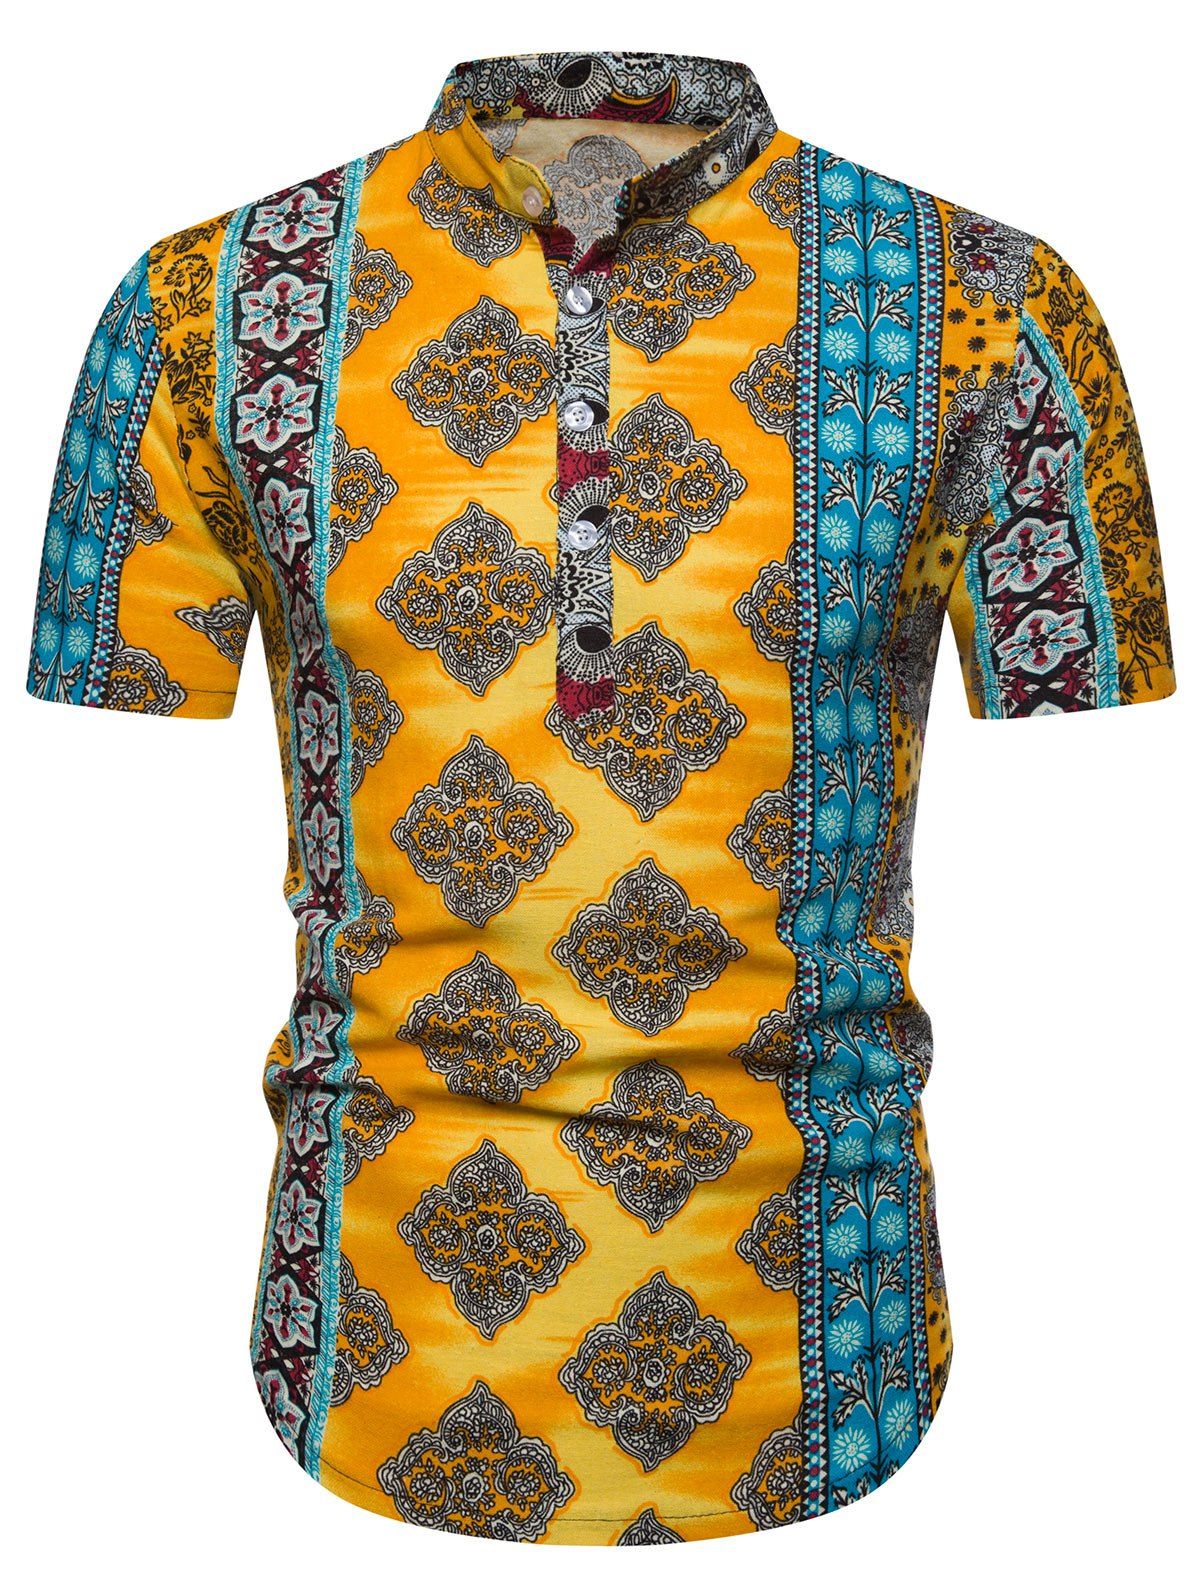 [34% OFF] 2021 Ethnic Geometric Pattern Short Sleeves Shirt In YELLOW ...